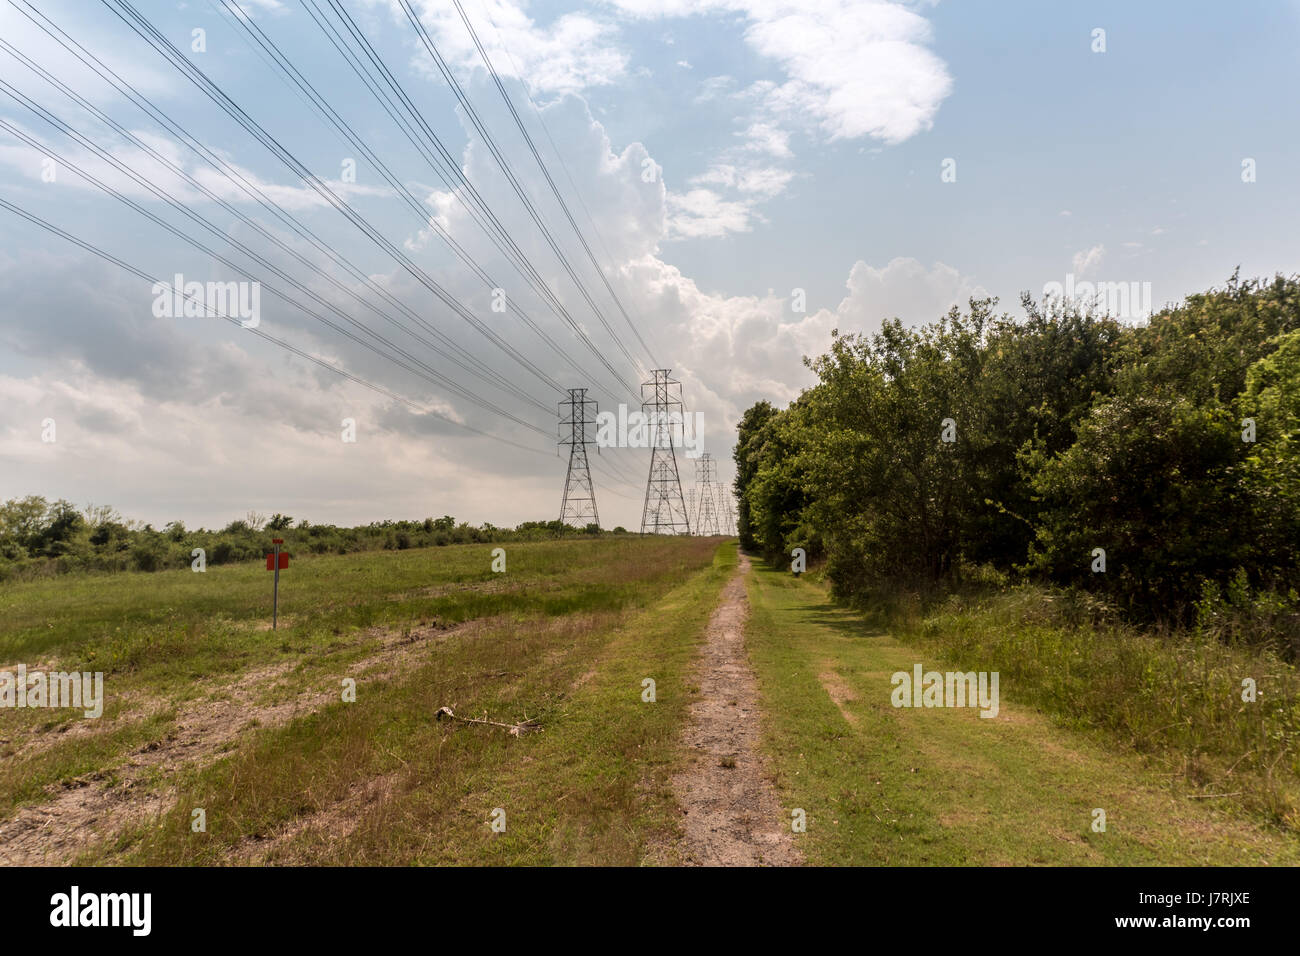 Power lines in a field on a sunny day Stock Photo